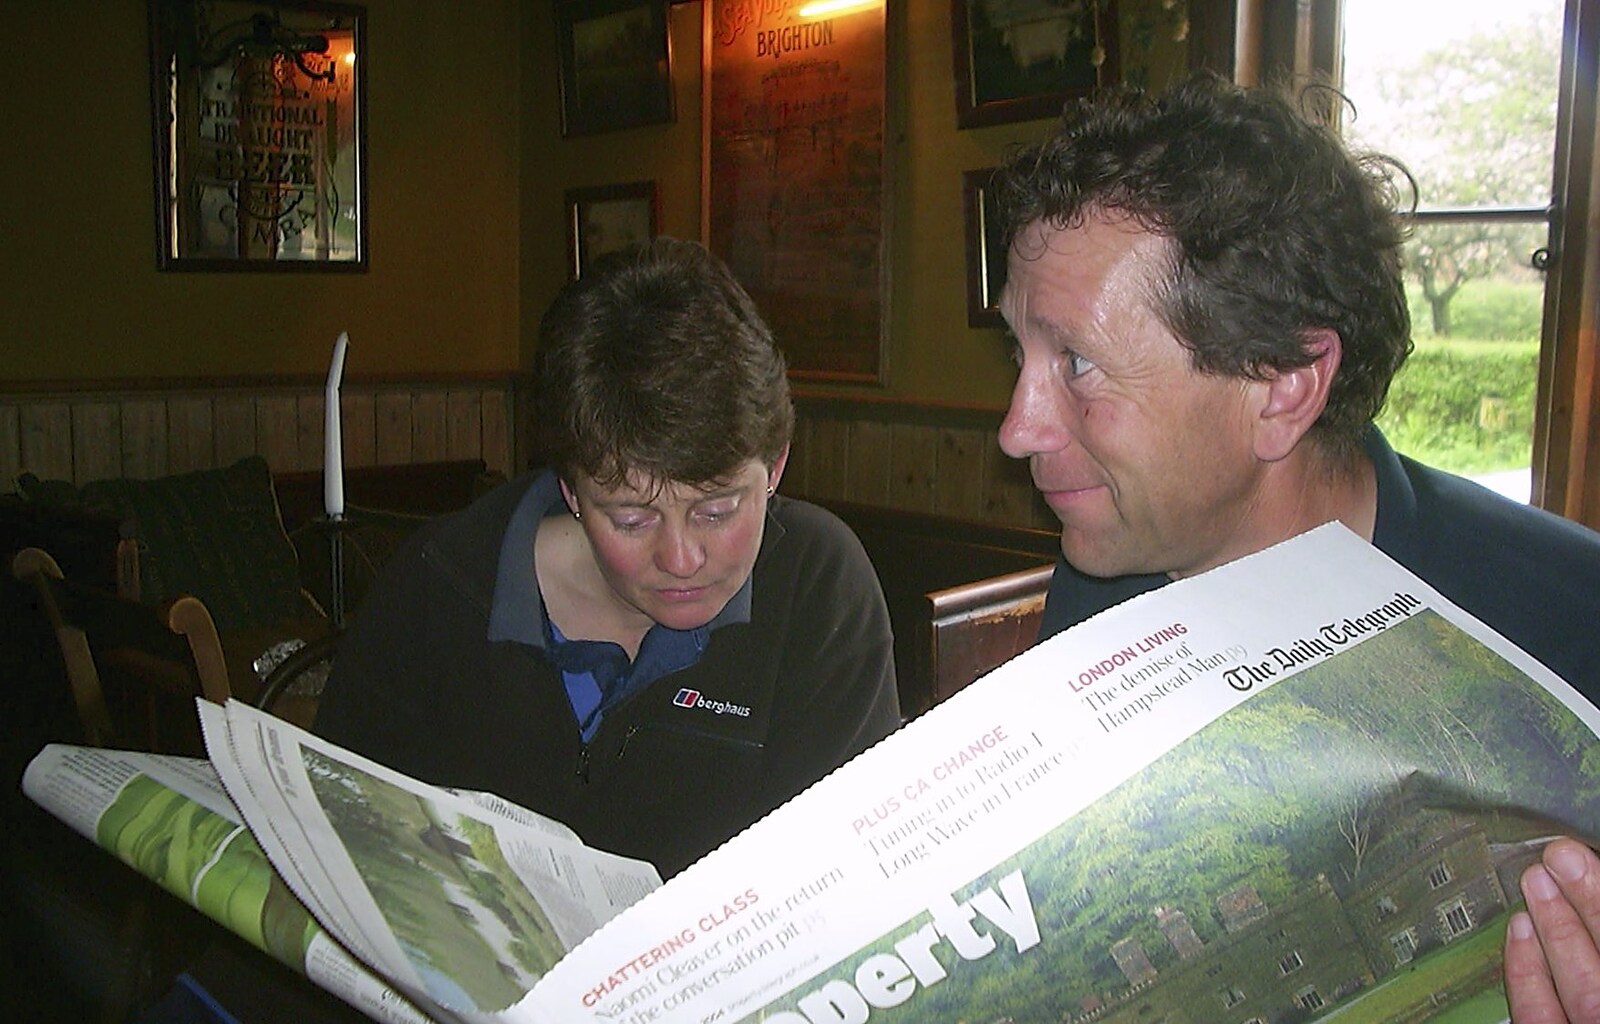 The BSCC Annual Bike Ride, Lenham, Kent - 8th May 2004: Pippa and Apple check the property pages